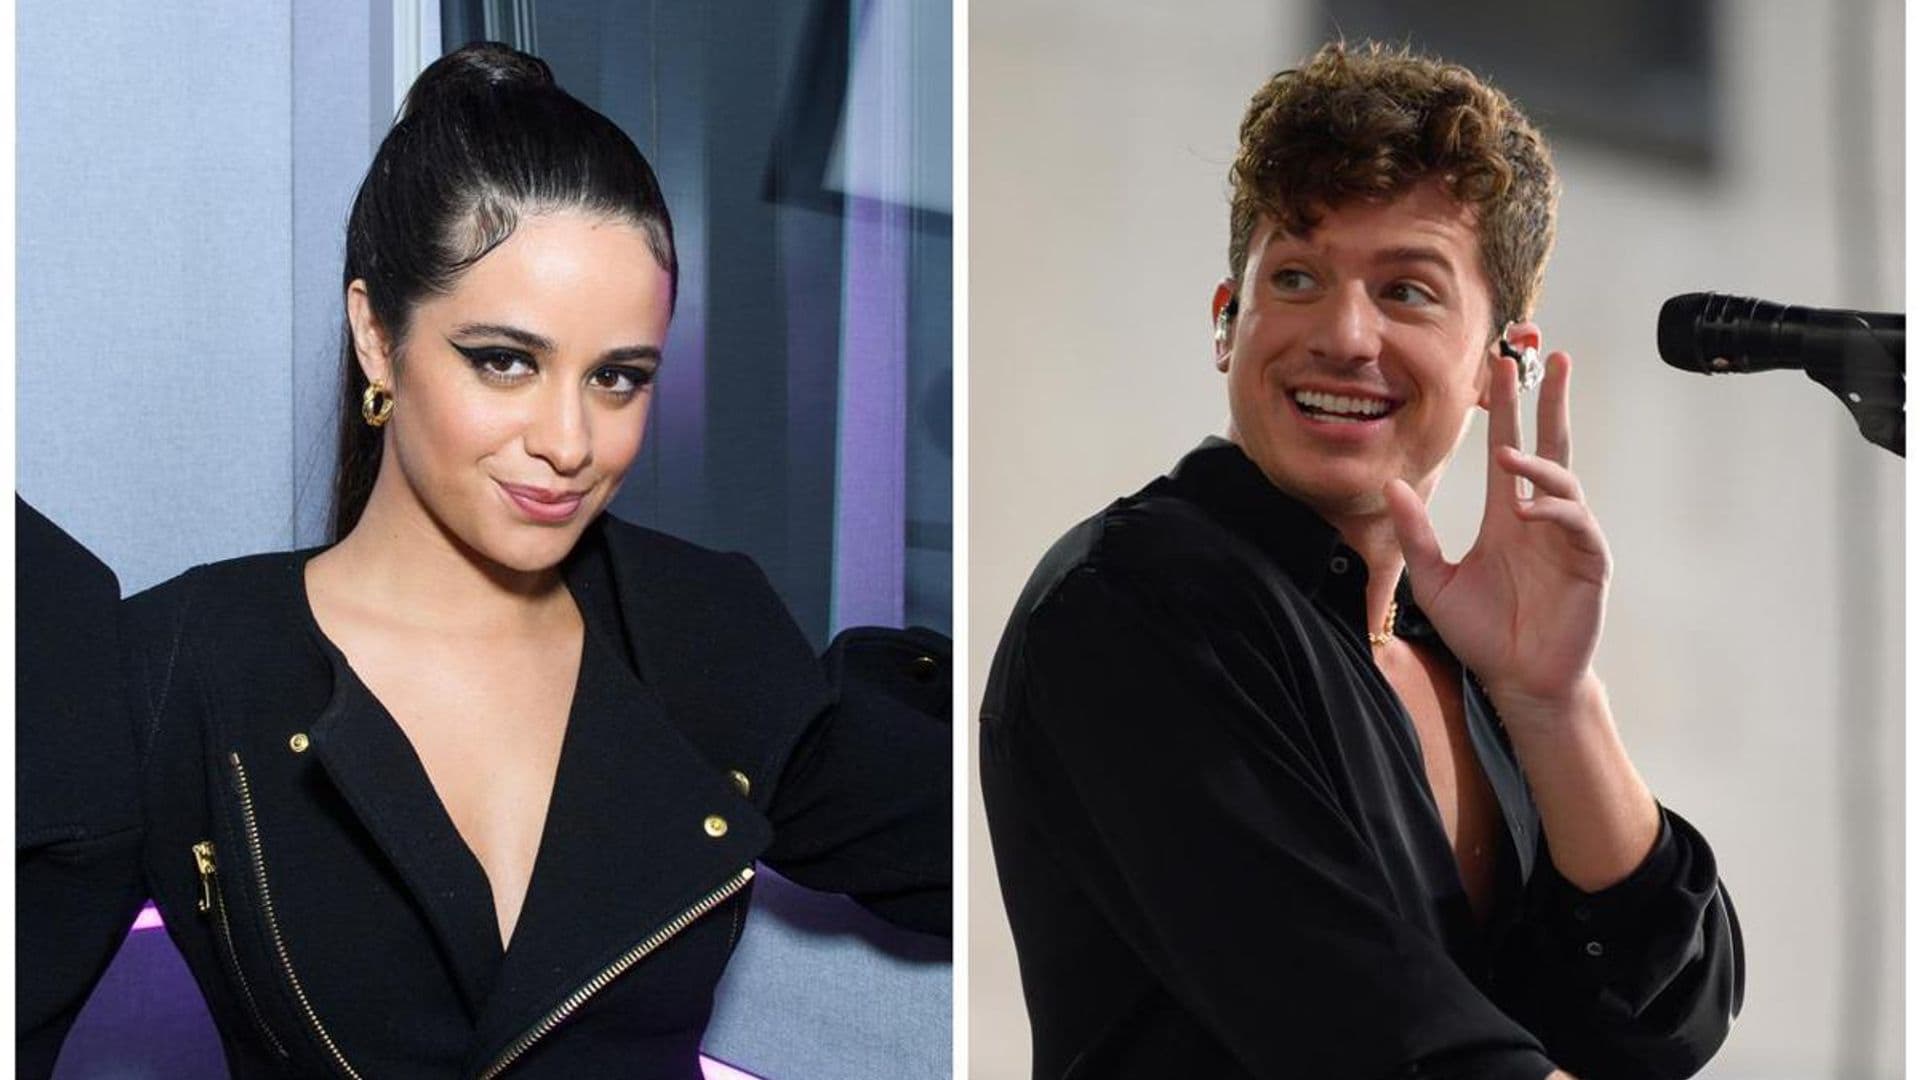 Camila Cabello appoints Charlie Puth as her Battle Advisor in ‘The Voice’